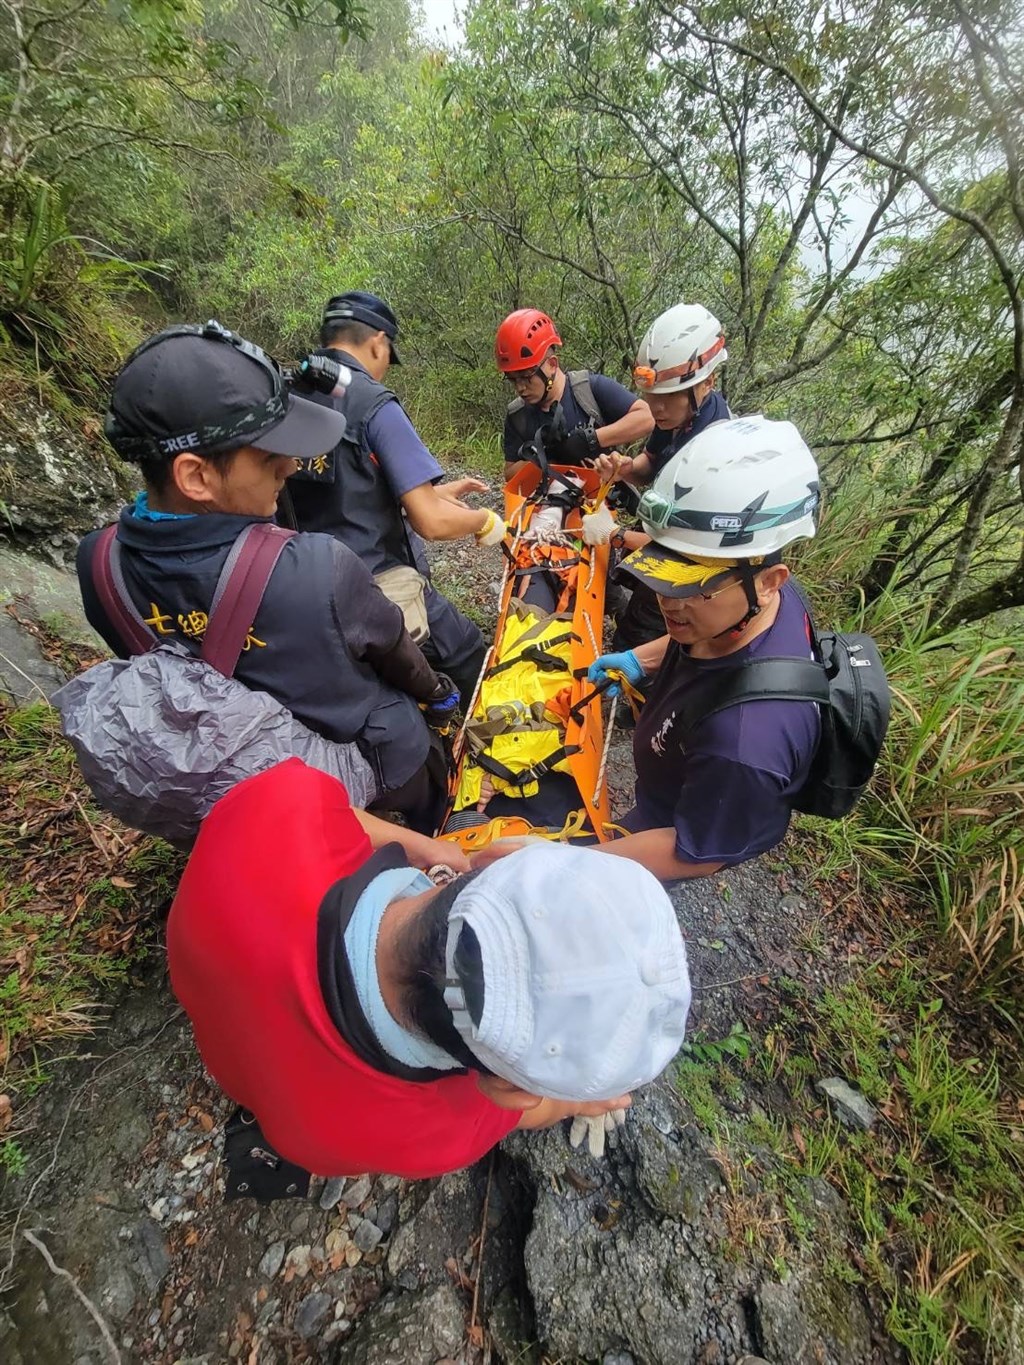 An injured hiker is carried by the rescue team. Photo courtesy of Hualien County Fire Department